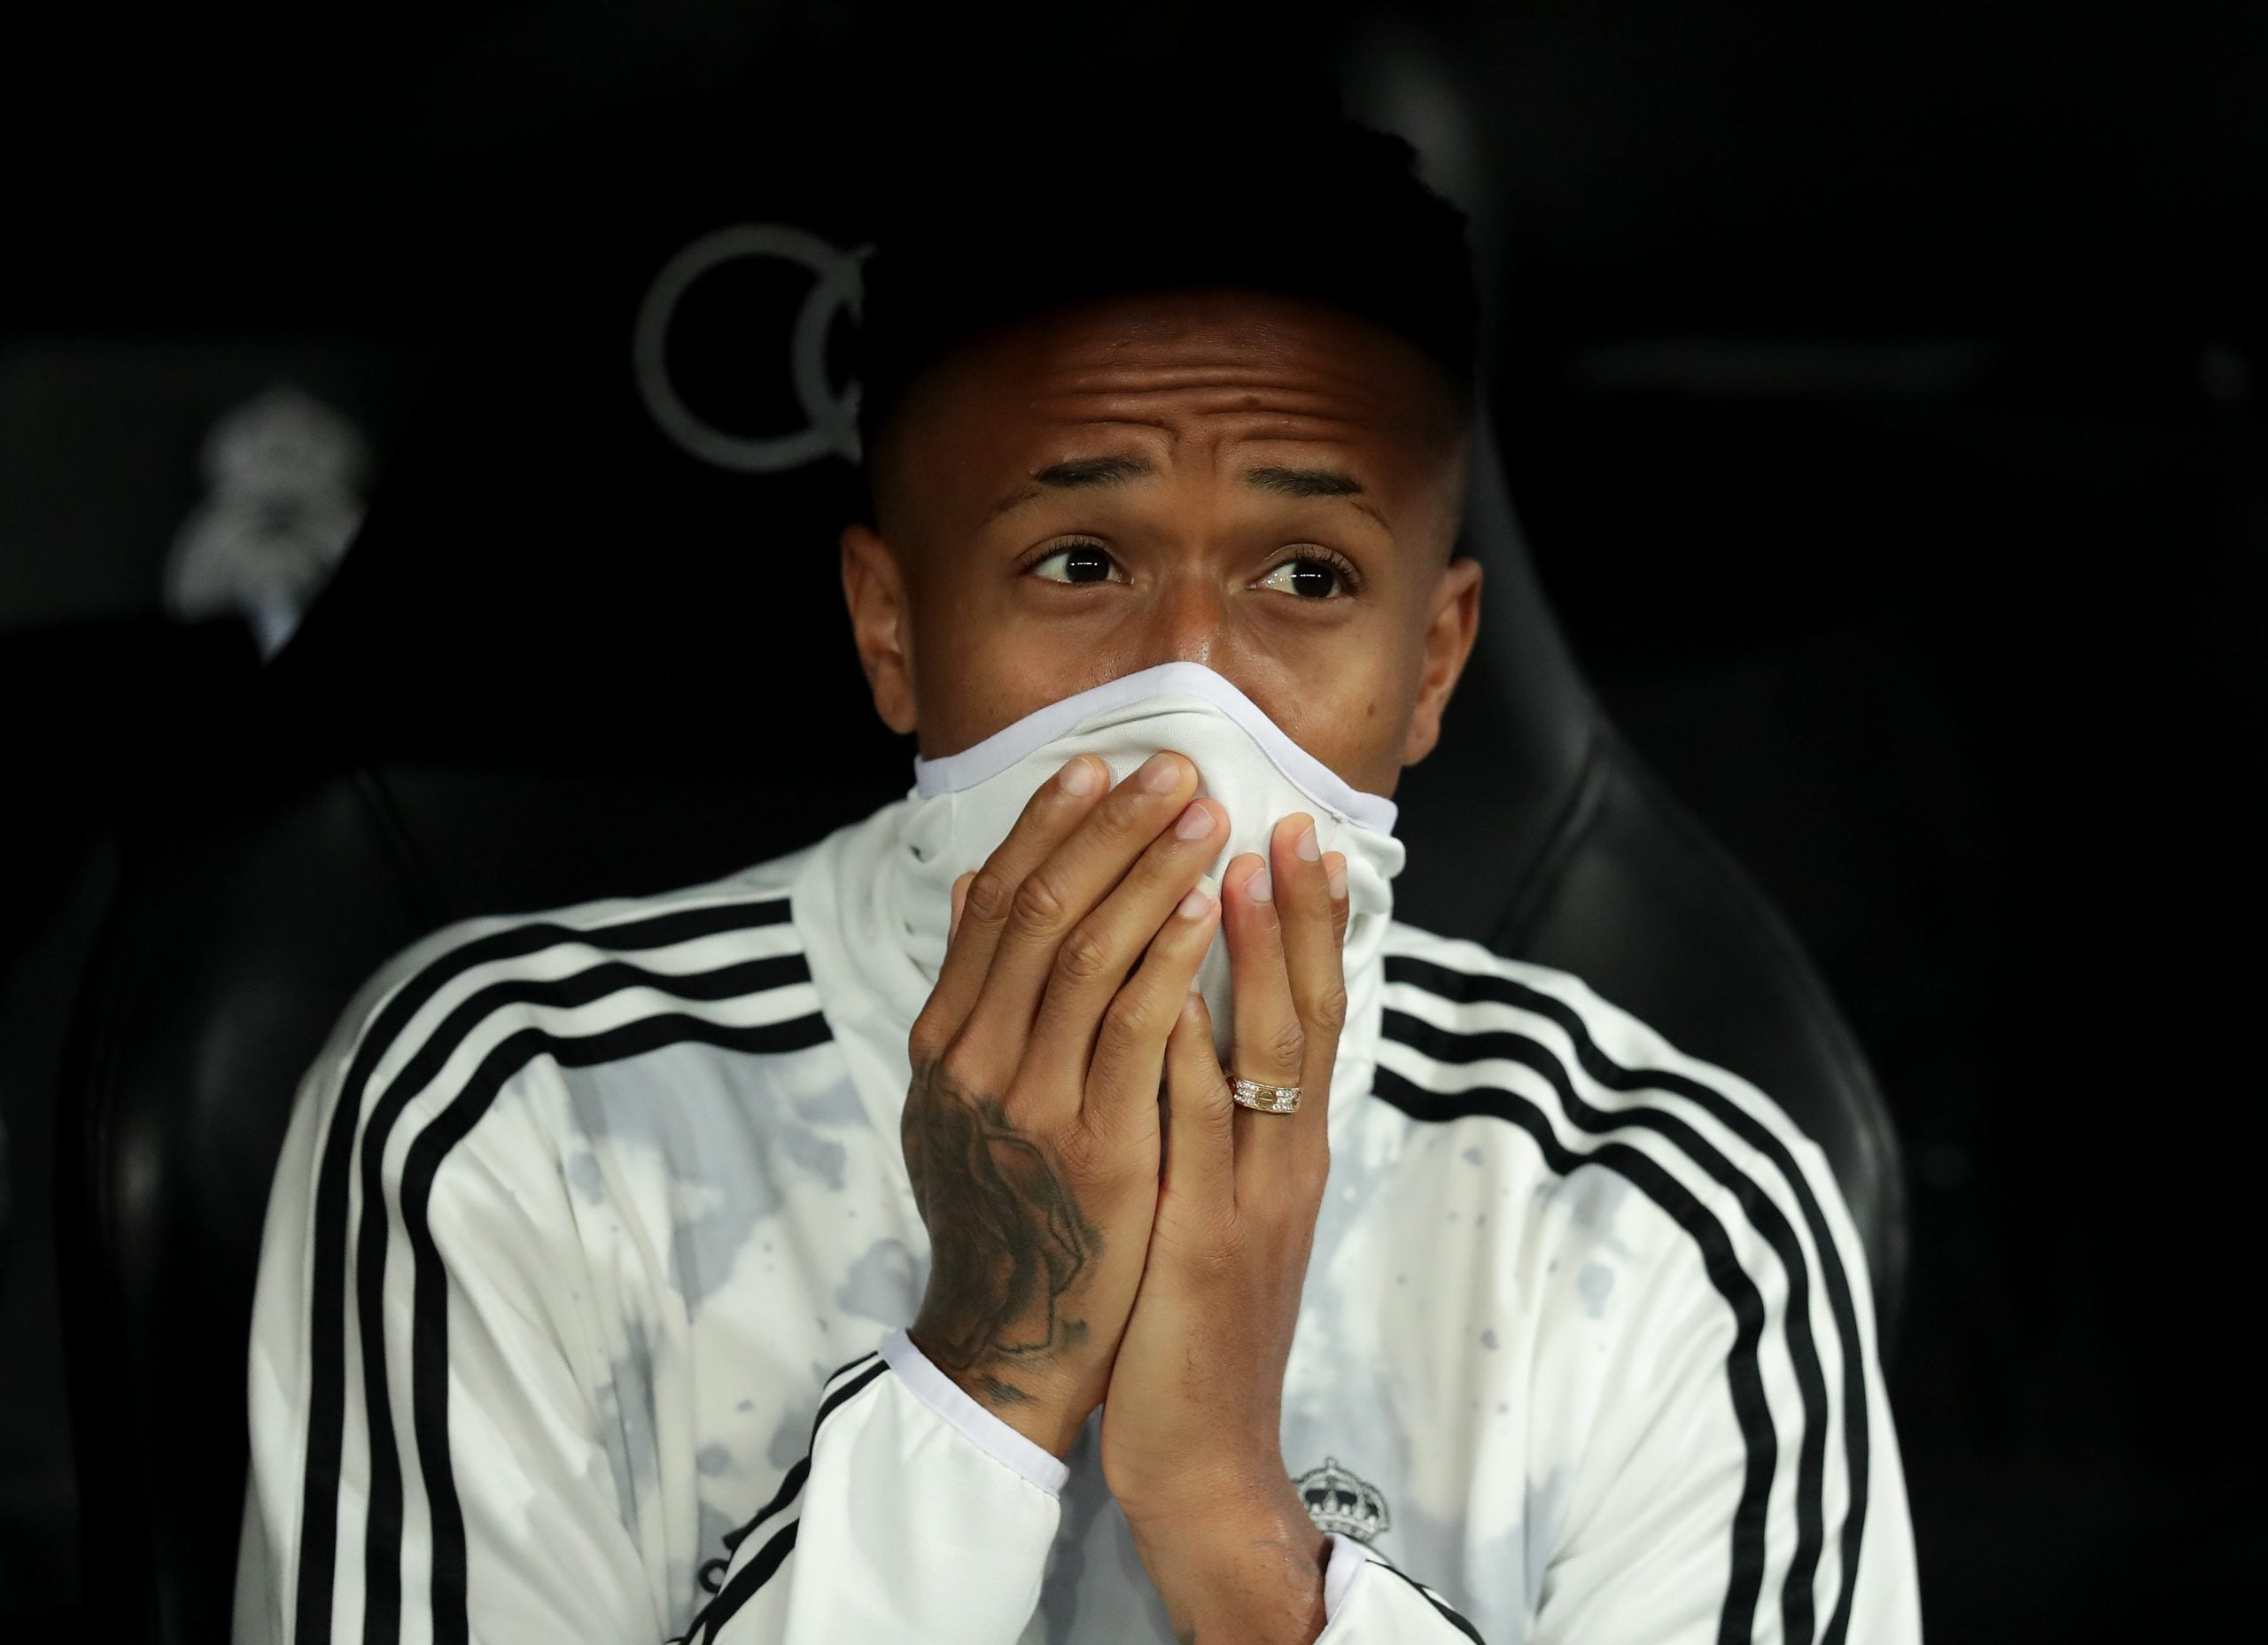 MADRID, SPAIN - OCTOBER 30: Eder Militao looks on from the bench prior to the Liga match between Real Madrid CF and CD Leganes at Estadio Santiago Bernabeu on October 30, 2019 in Madrid, Spain. (Photo by Gonzalo Arroyo Moreno/Getty Images)